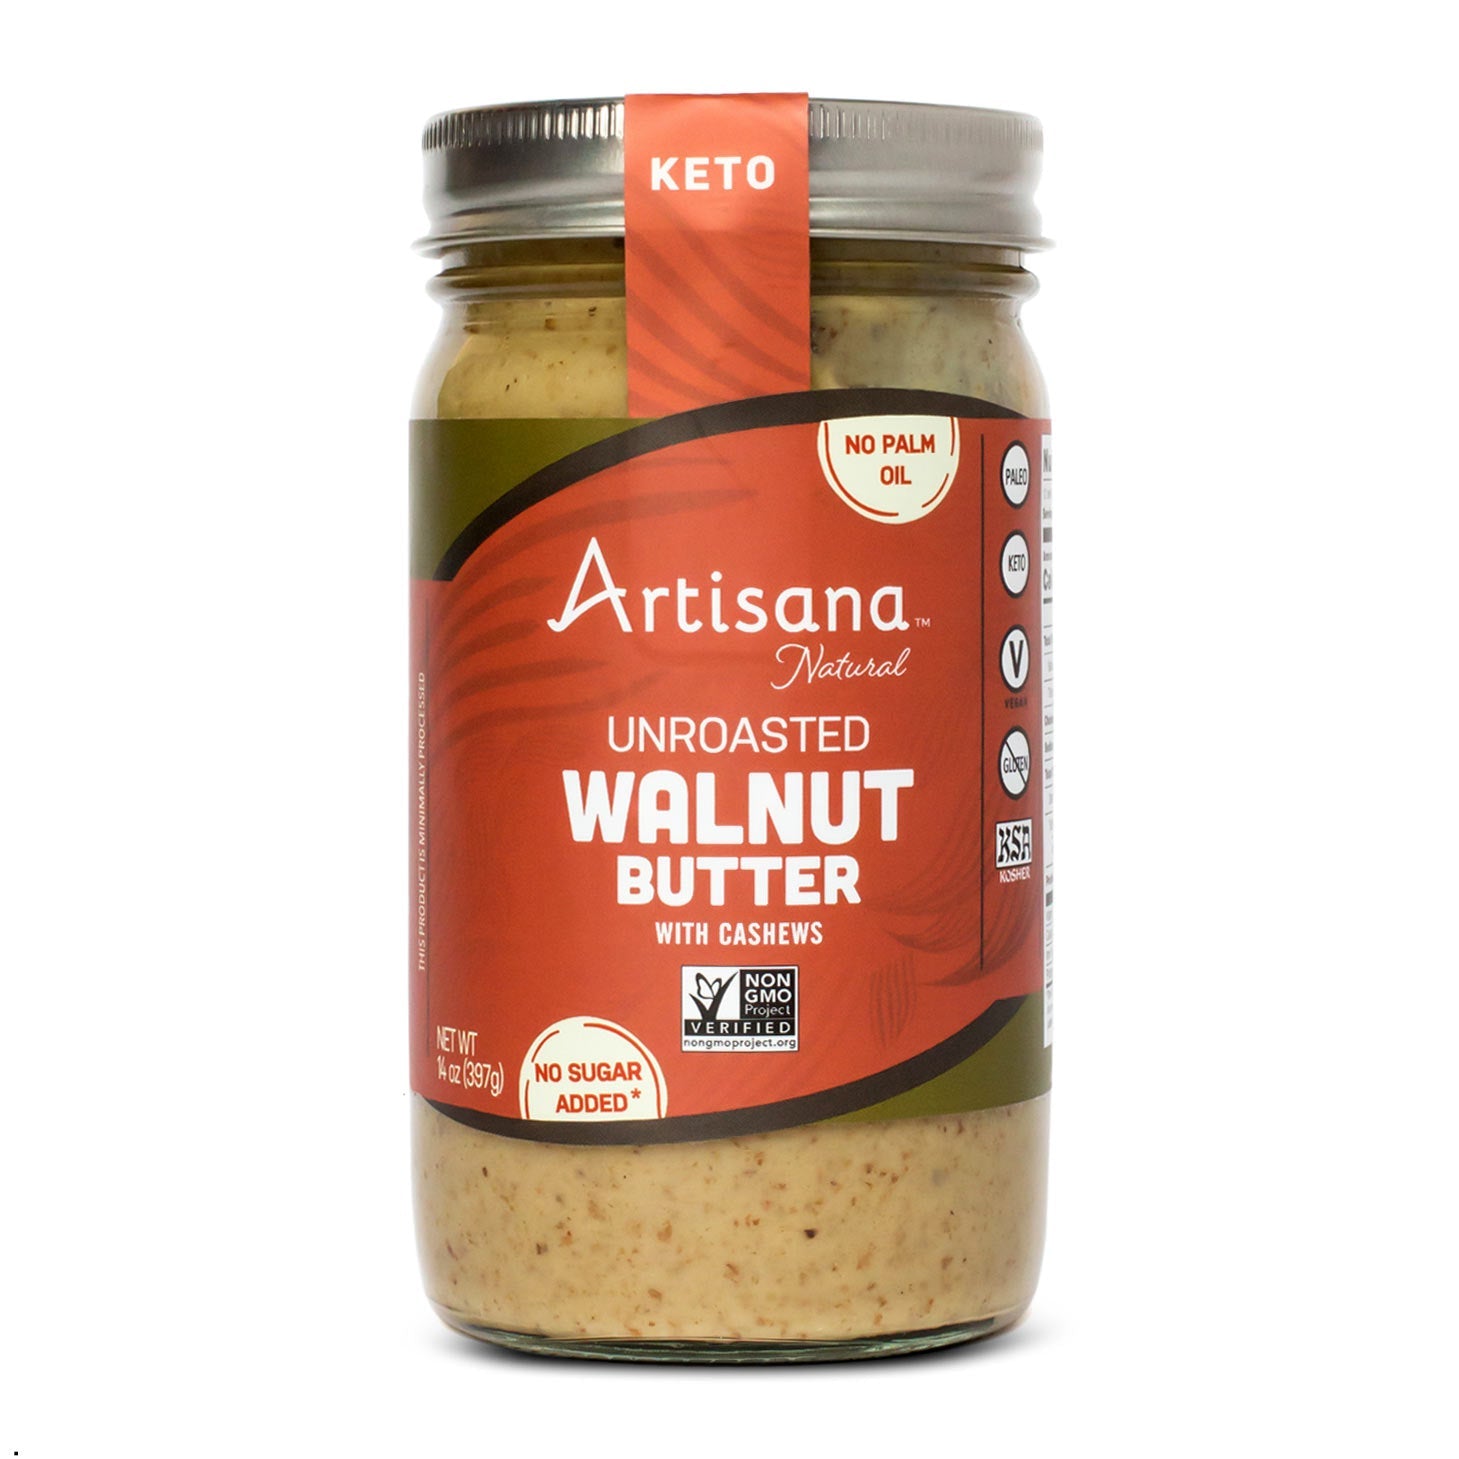 Unroasted Walnut Butter with Cashews